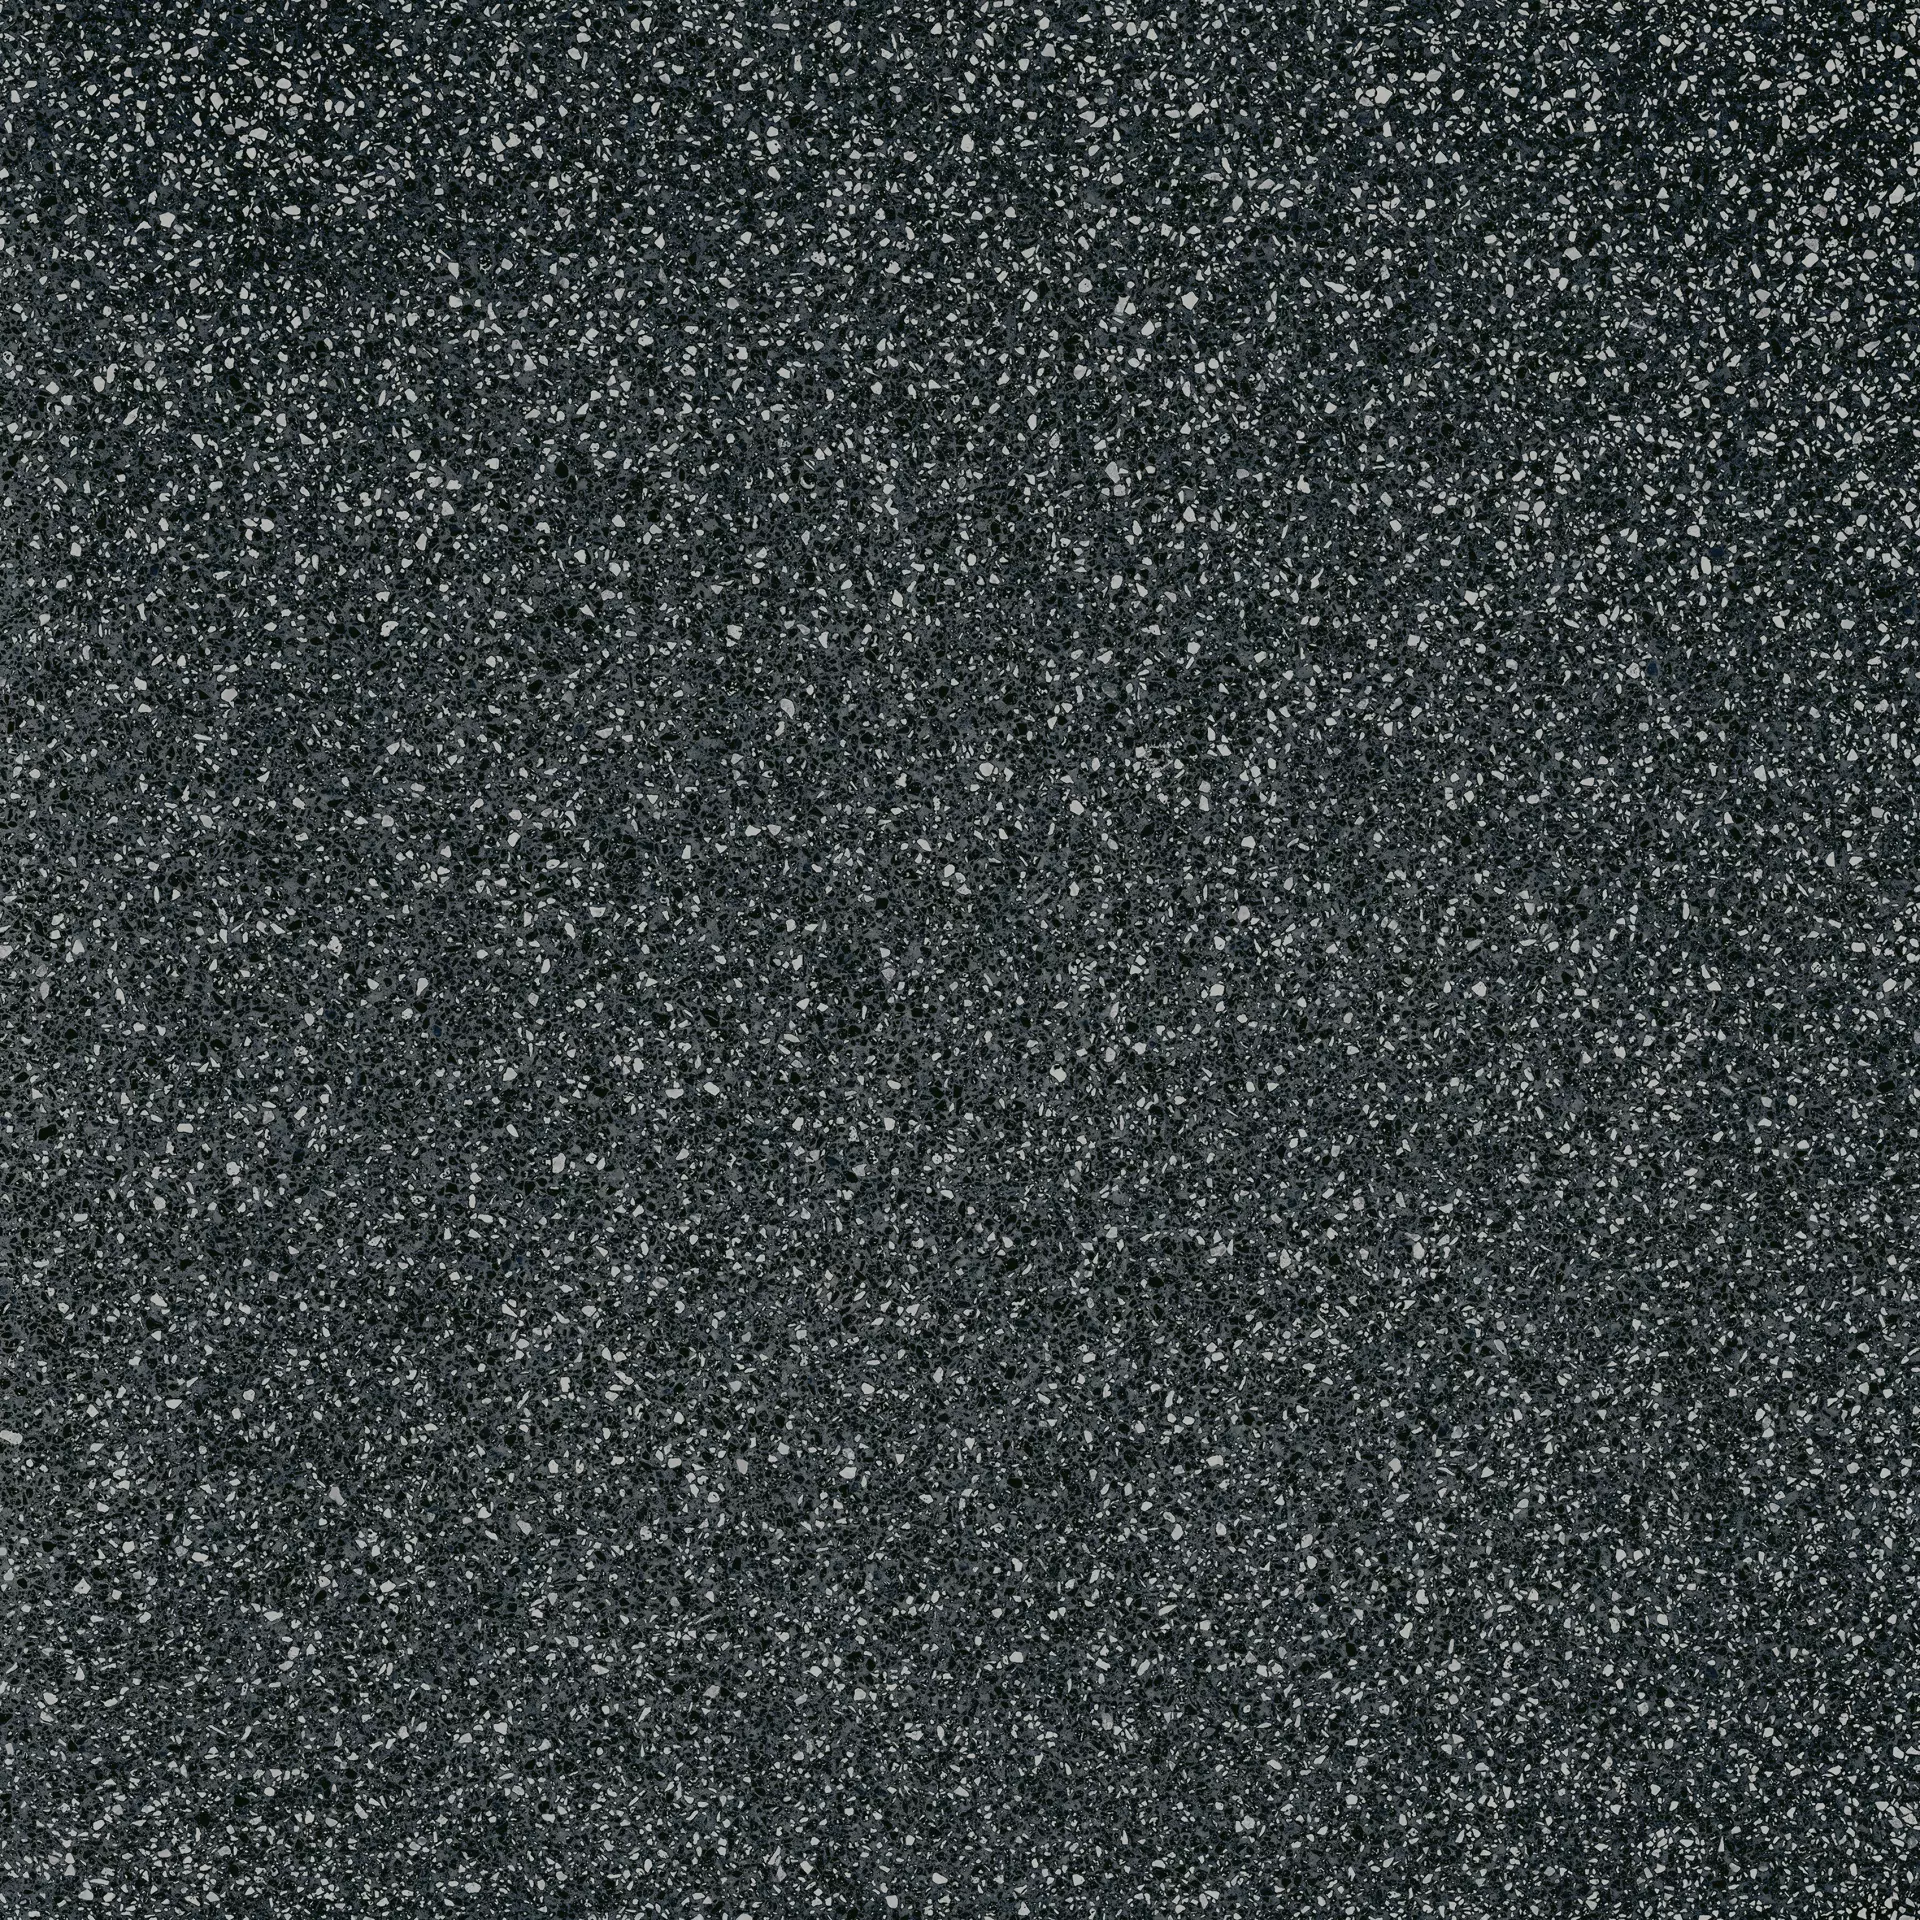 Refin Flake Black Small Soft ND95 60x60cm rectified 9mm